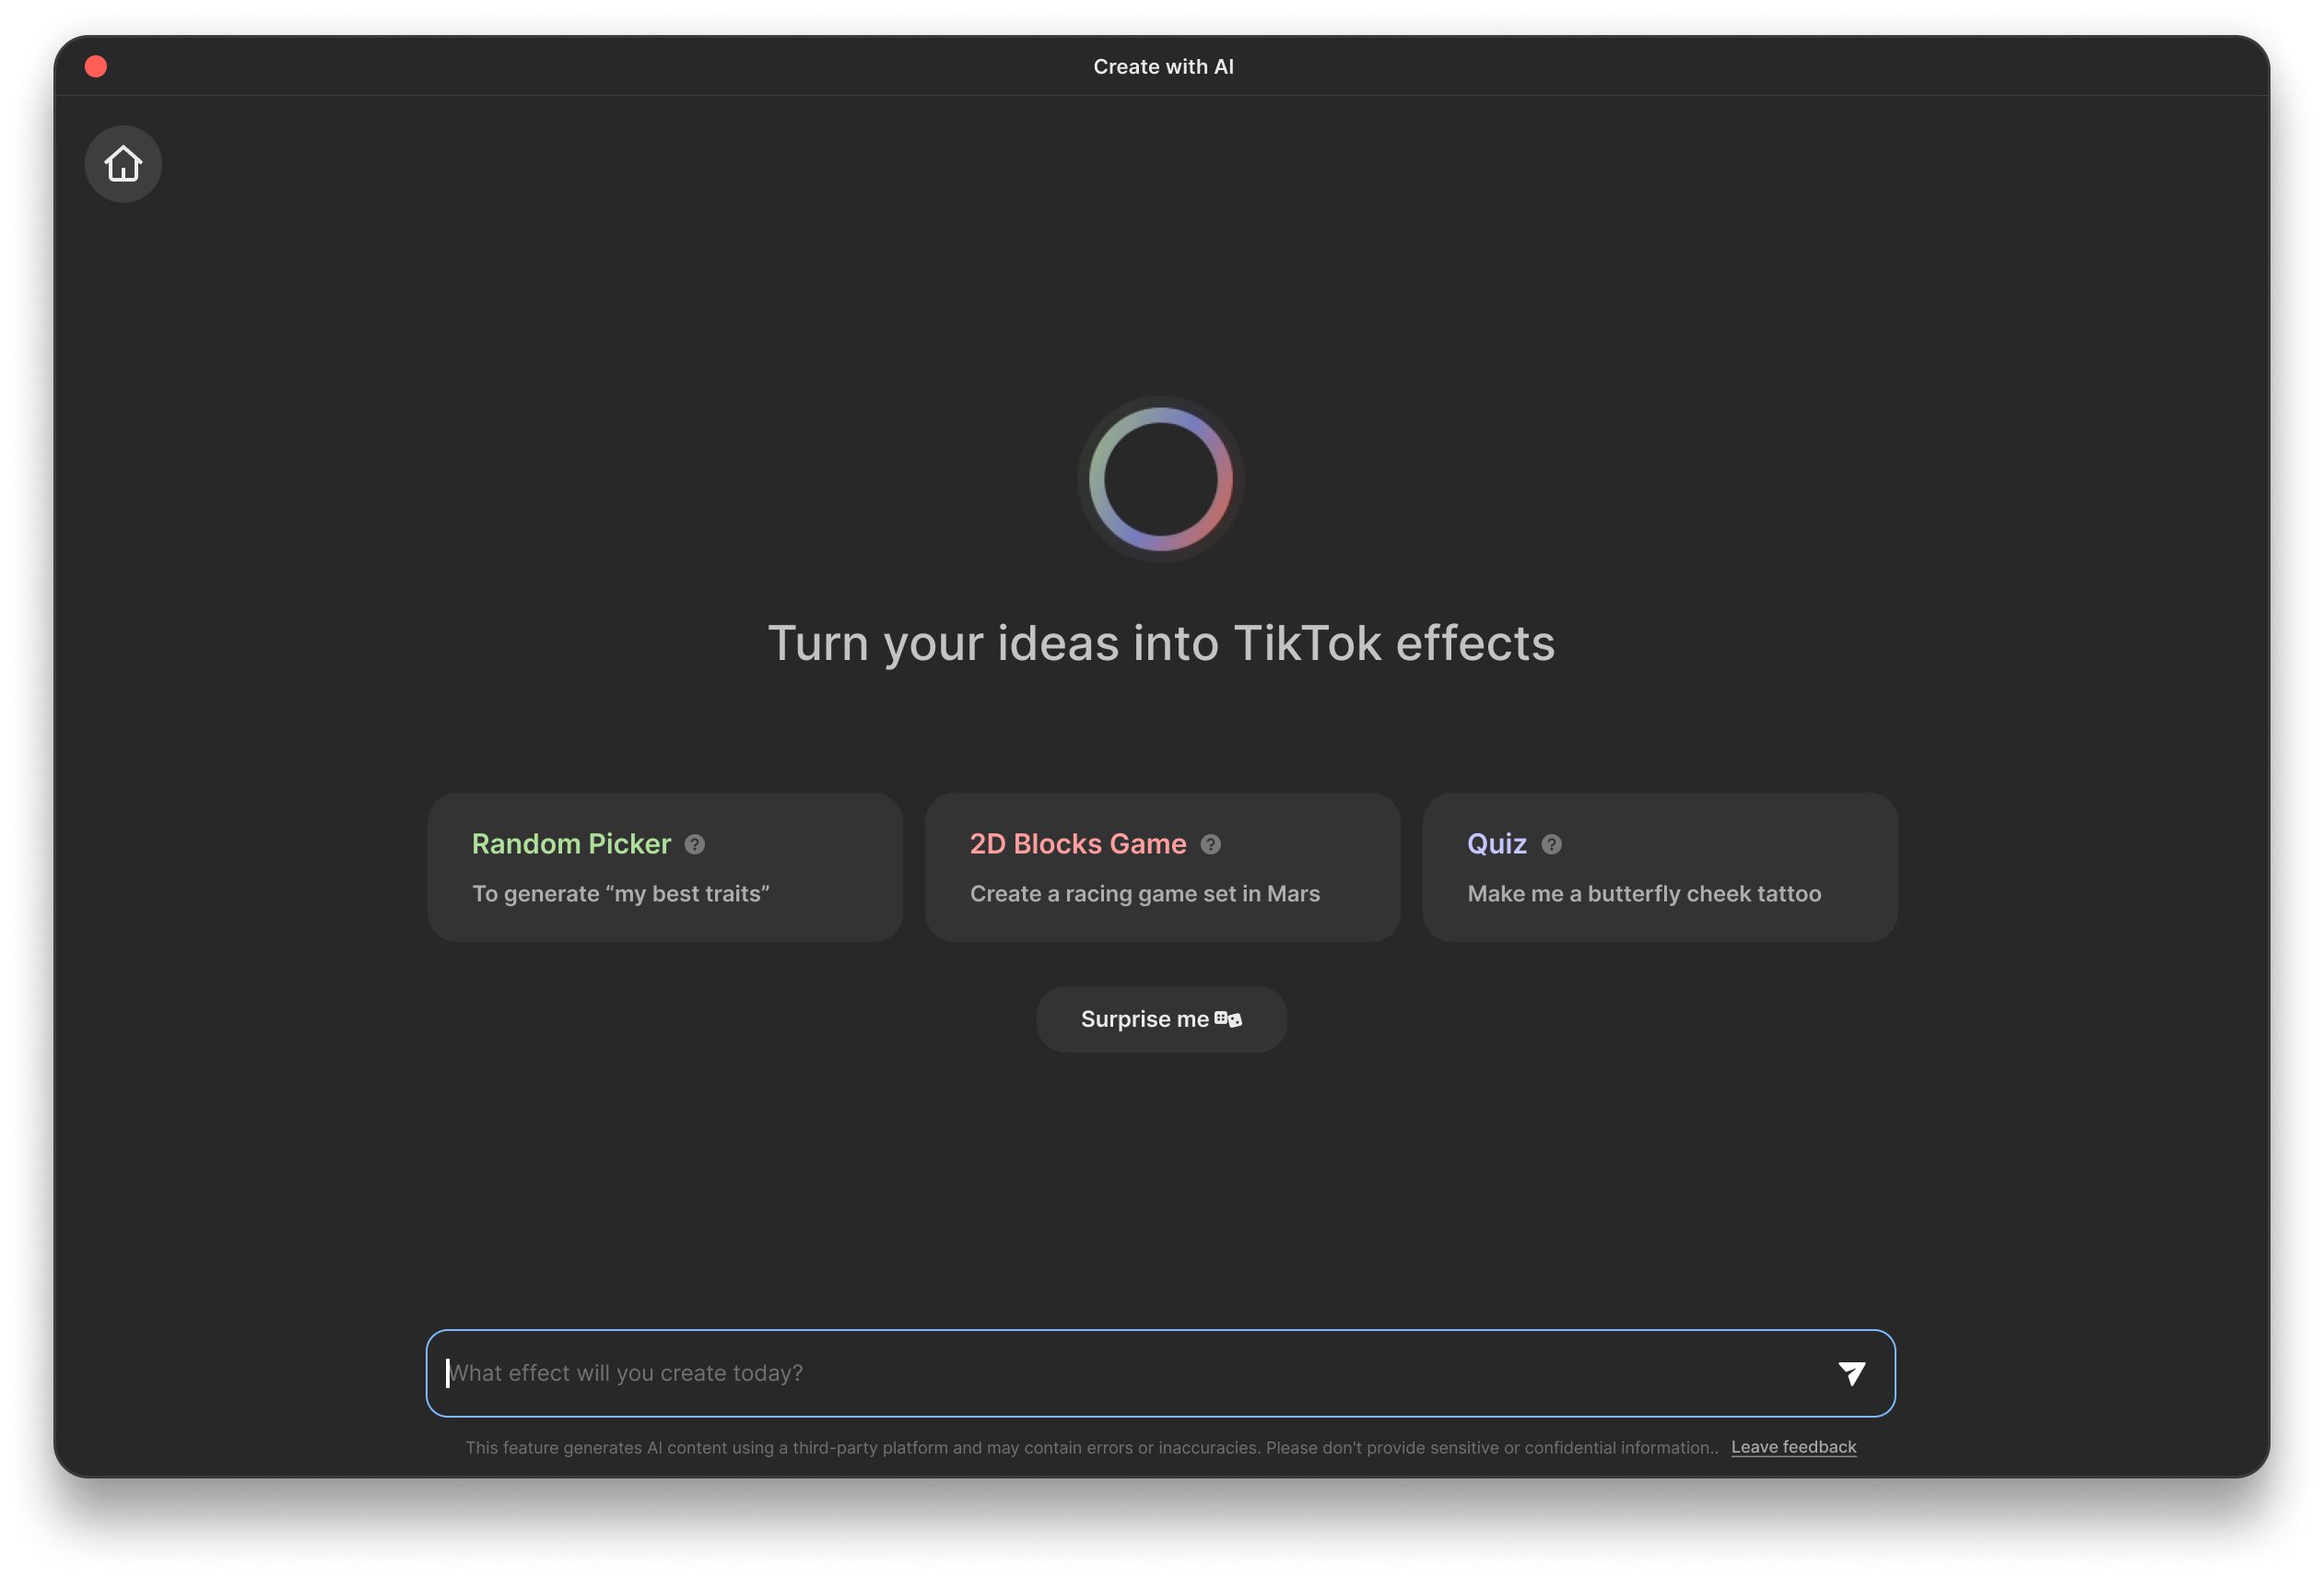 Effect House's AI assistant interface featuring built-in and customizable text prompts for creating TikTok effects